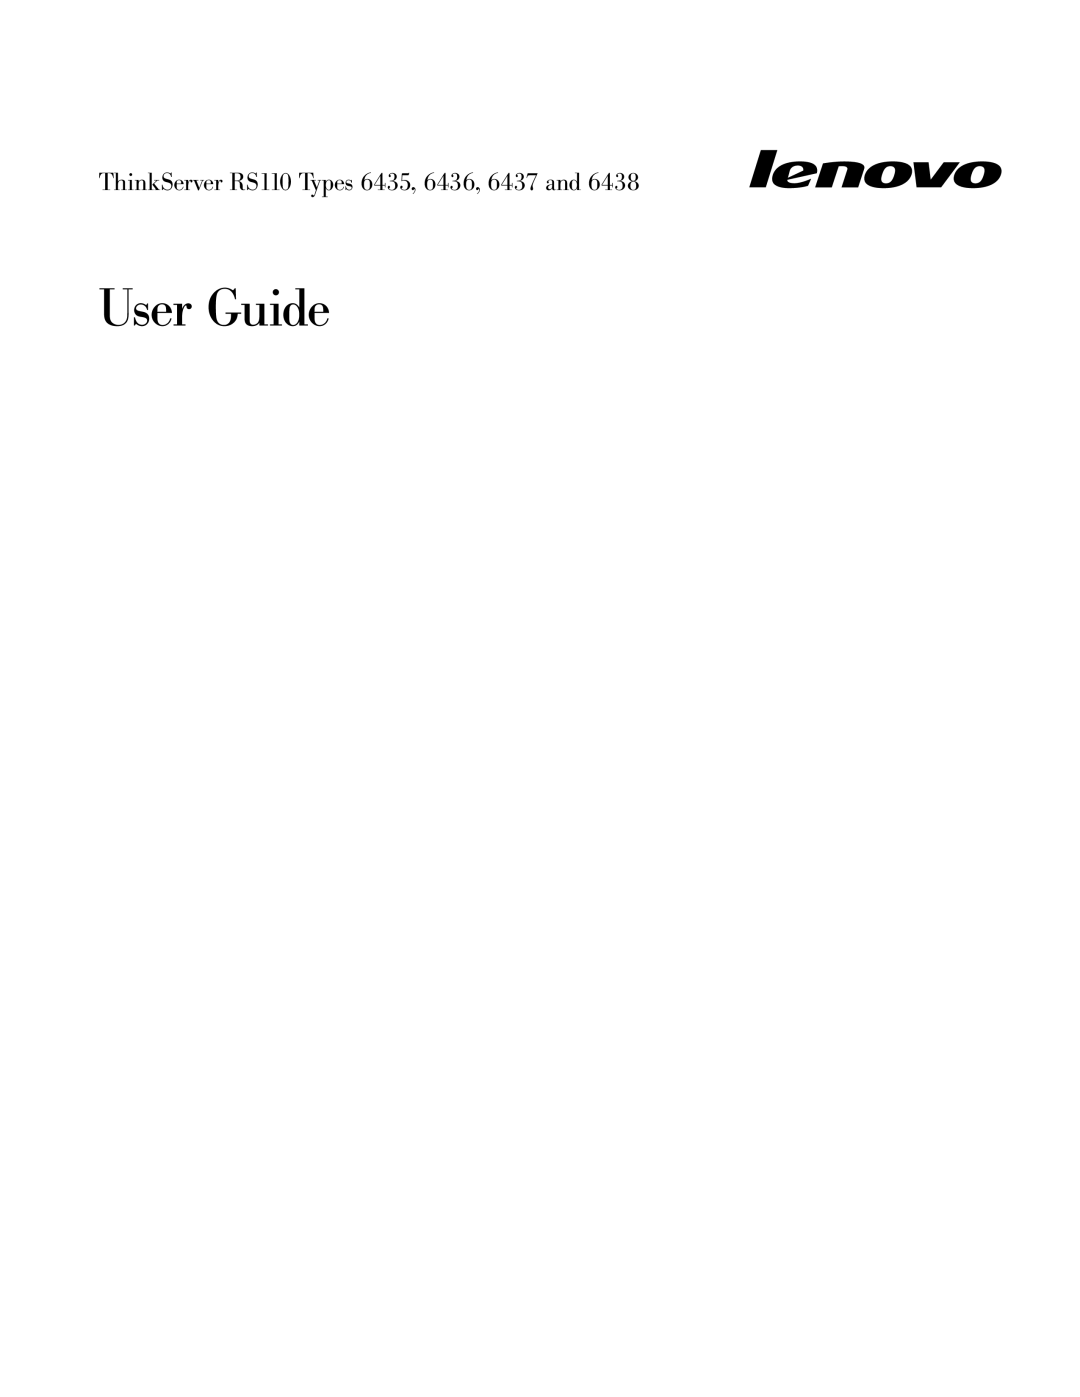 Lenovo 6438 manual Installation Guide, ThinkServer RS110 Types 6435, 6436, 6437, and 